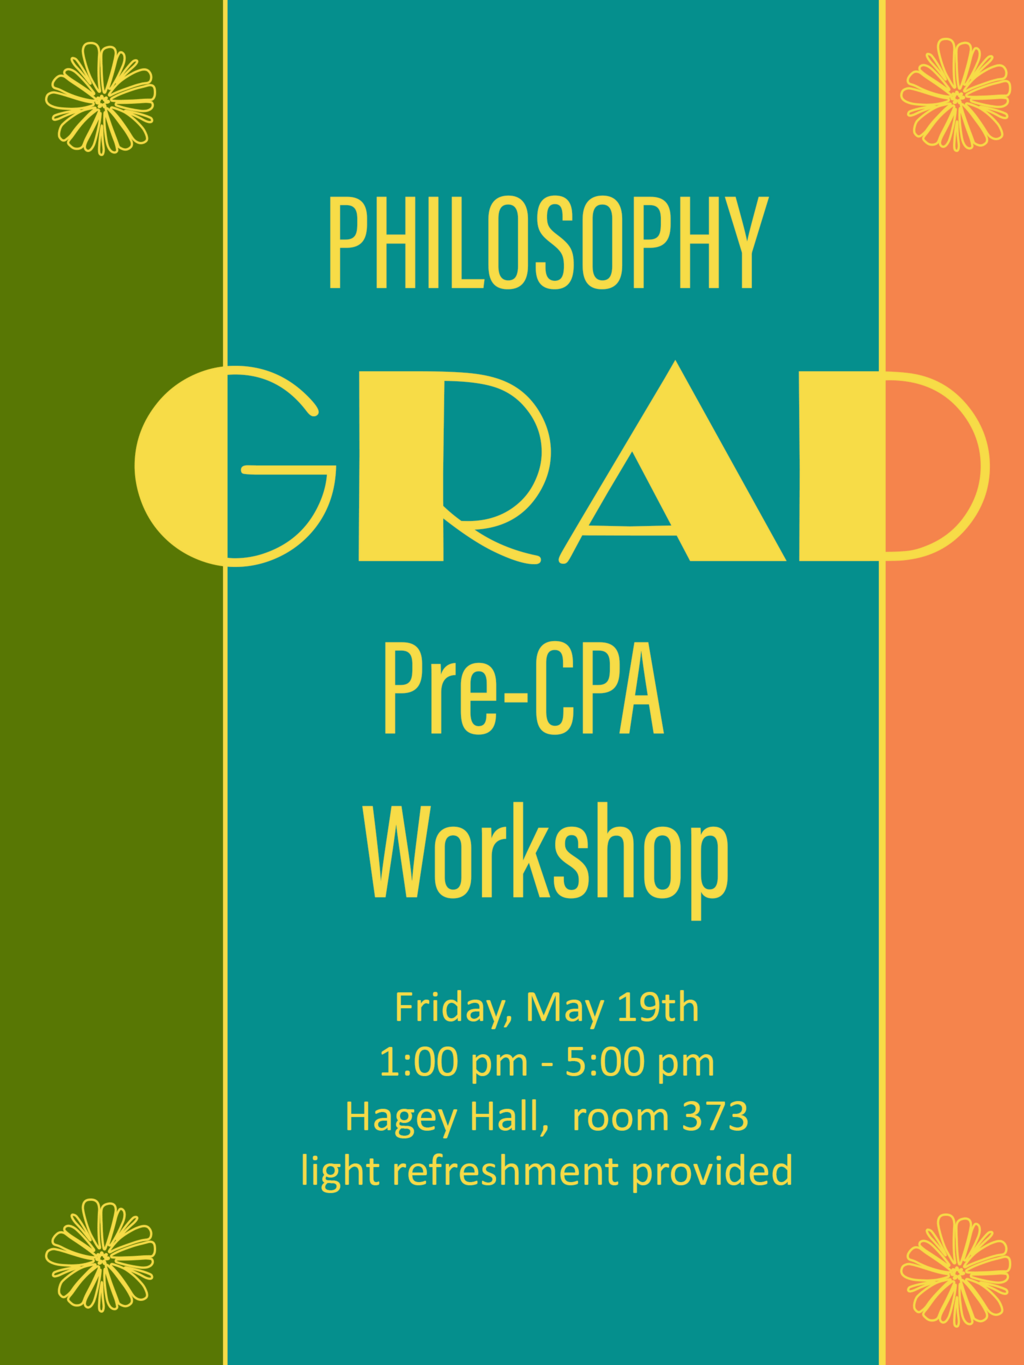 "Philosophy GRAD PRe-CPA Workshop" and three vertical stripes, left, green, middle teal, right muted orange, date and time text 